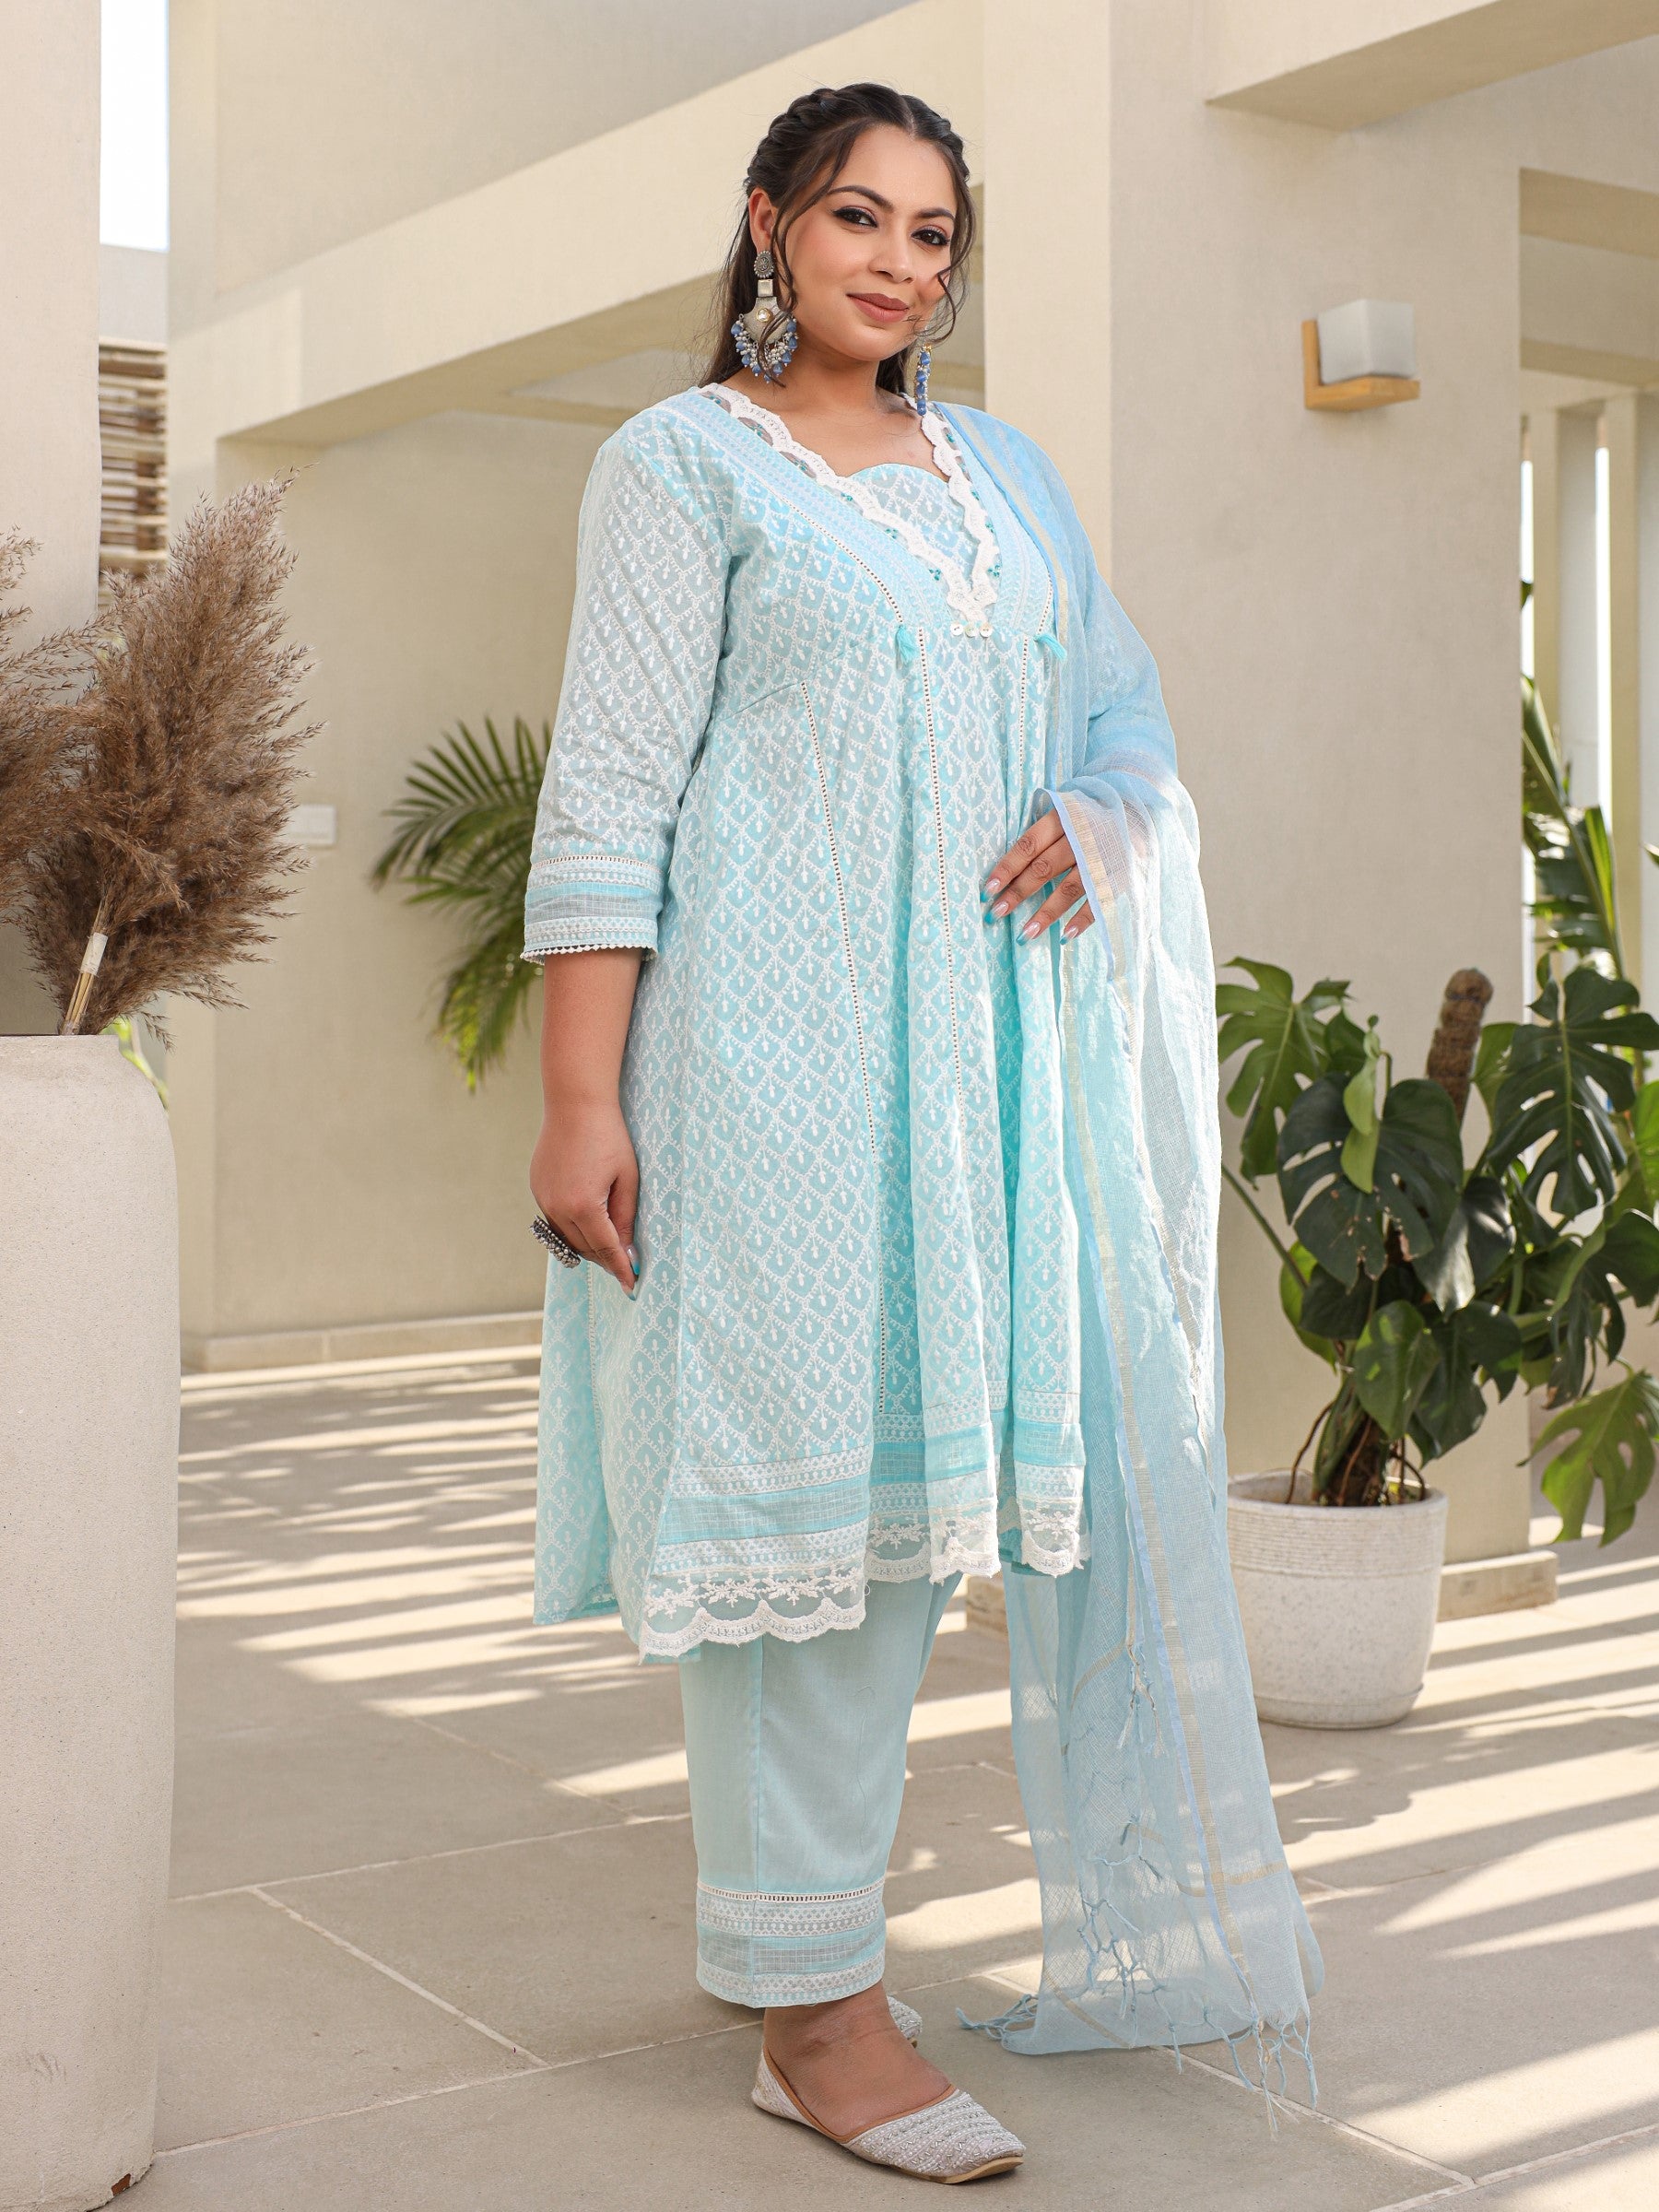 The Rooh Sky Blue Ethnic Motif Printed & Laced Pure Cotton Plus Size Anarkali Kurta Pants & Dupatta Set With Tassels Sequins & Buttons